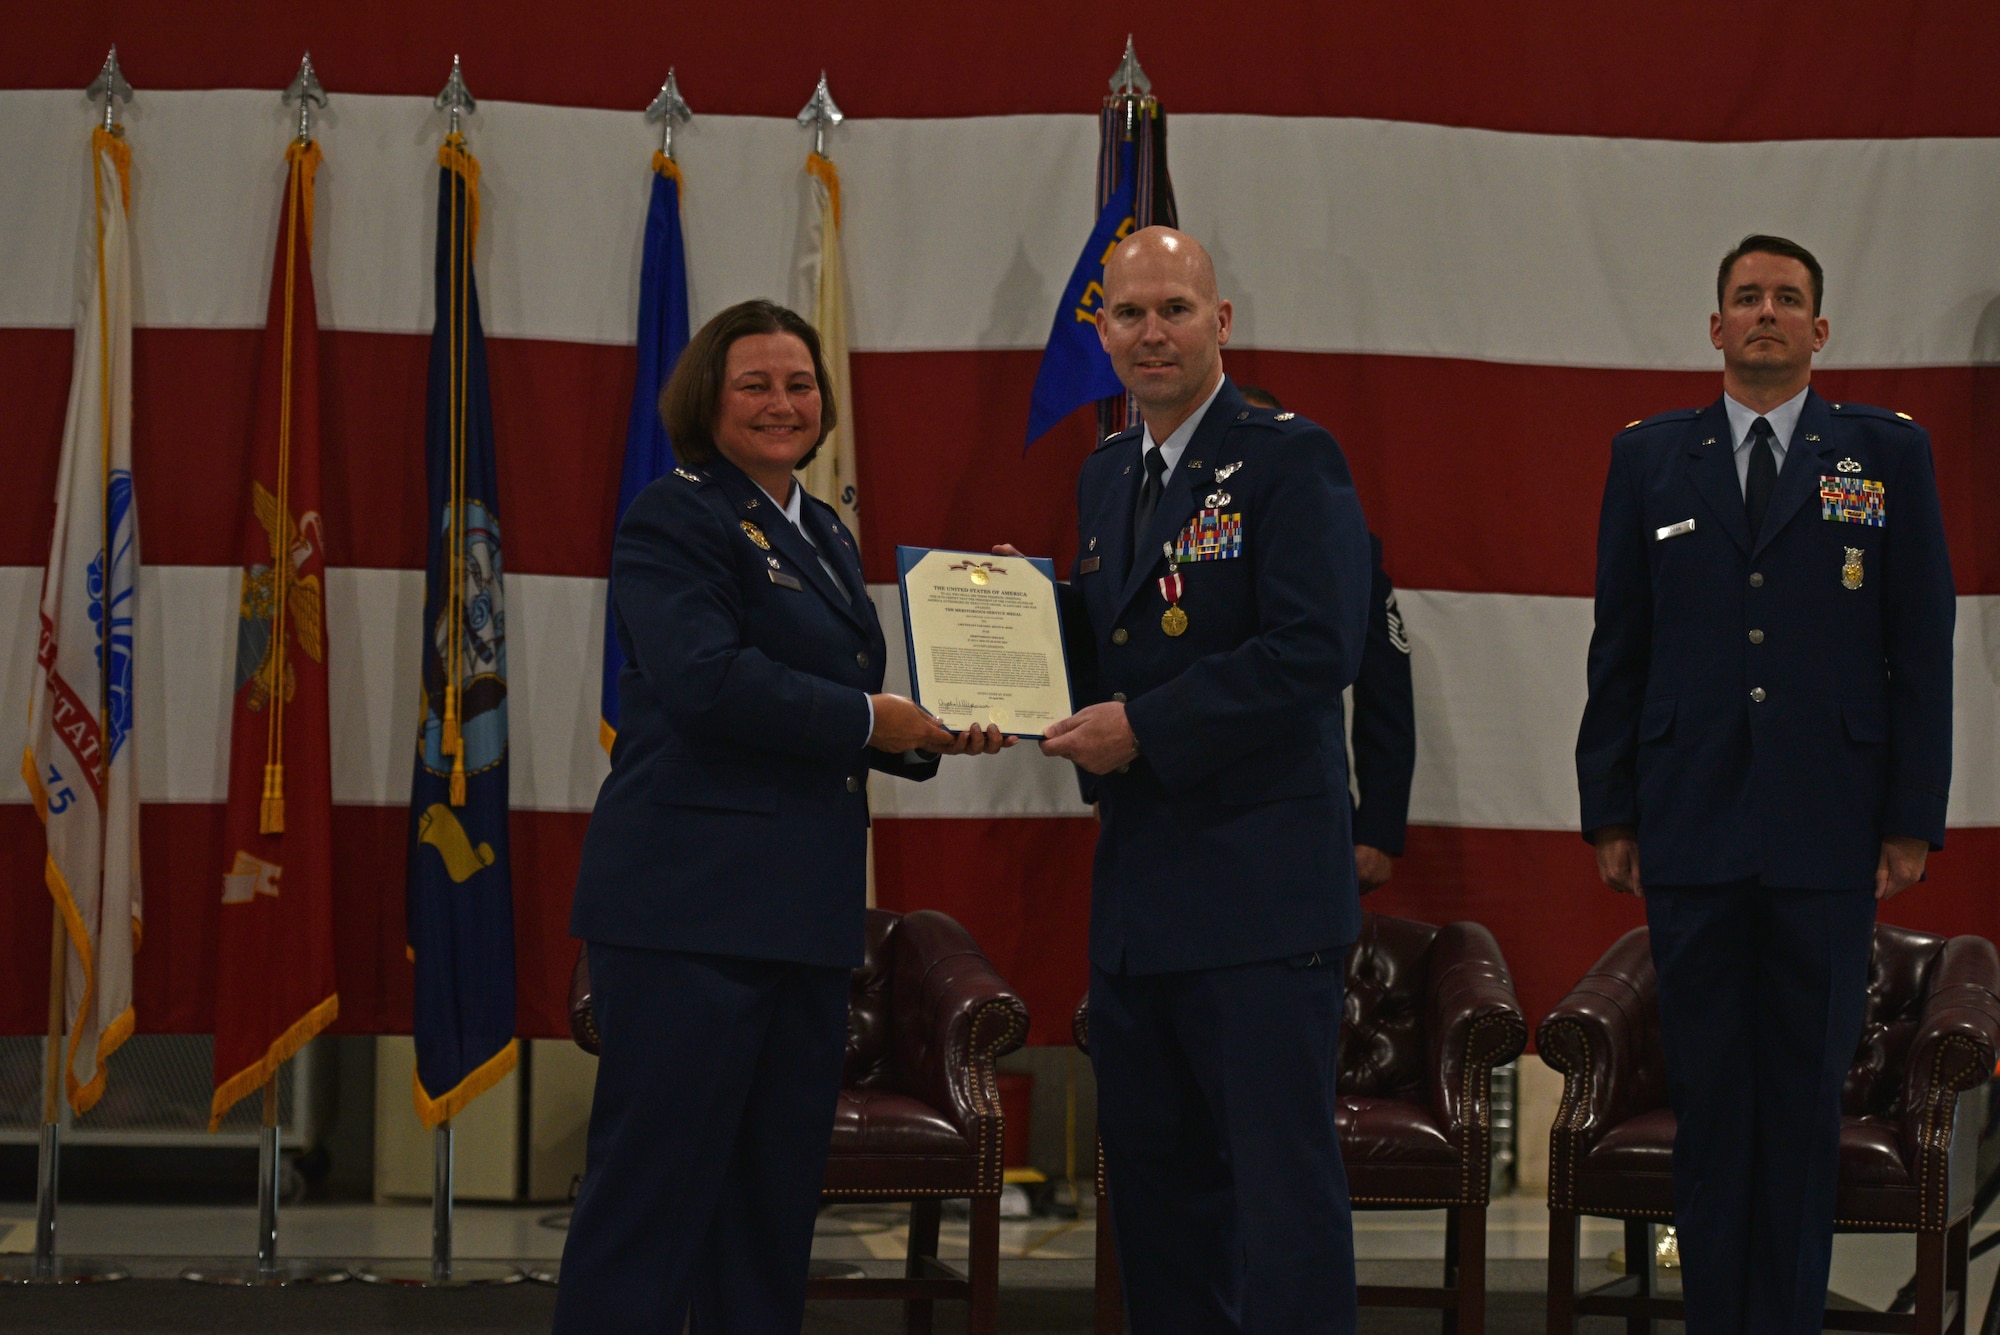 U.S. Air Force Col. Angelina Maguinness, 17th Training Group commander, presents Lt. Col. Kevin Boss, 312th Training Squadron outgoing commander, the certificate for Boss’s Meritorious Service Medal during the change of command ceremony at the Louis F. Garland Department of Defense Fire Academy High Bay on Goodfellow Air Force Base, Texas, June 1, 2021. Boss was decorated for leading major planning efforts to combat COVID-19 while ensuring safety and the quality of fire protection in technical applications training. (U.S. Air Force photo by Senior Airman Ashley Thrash)